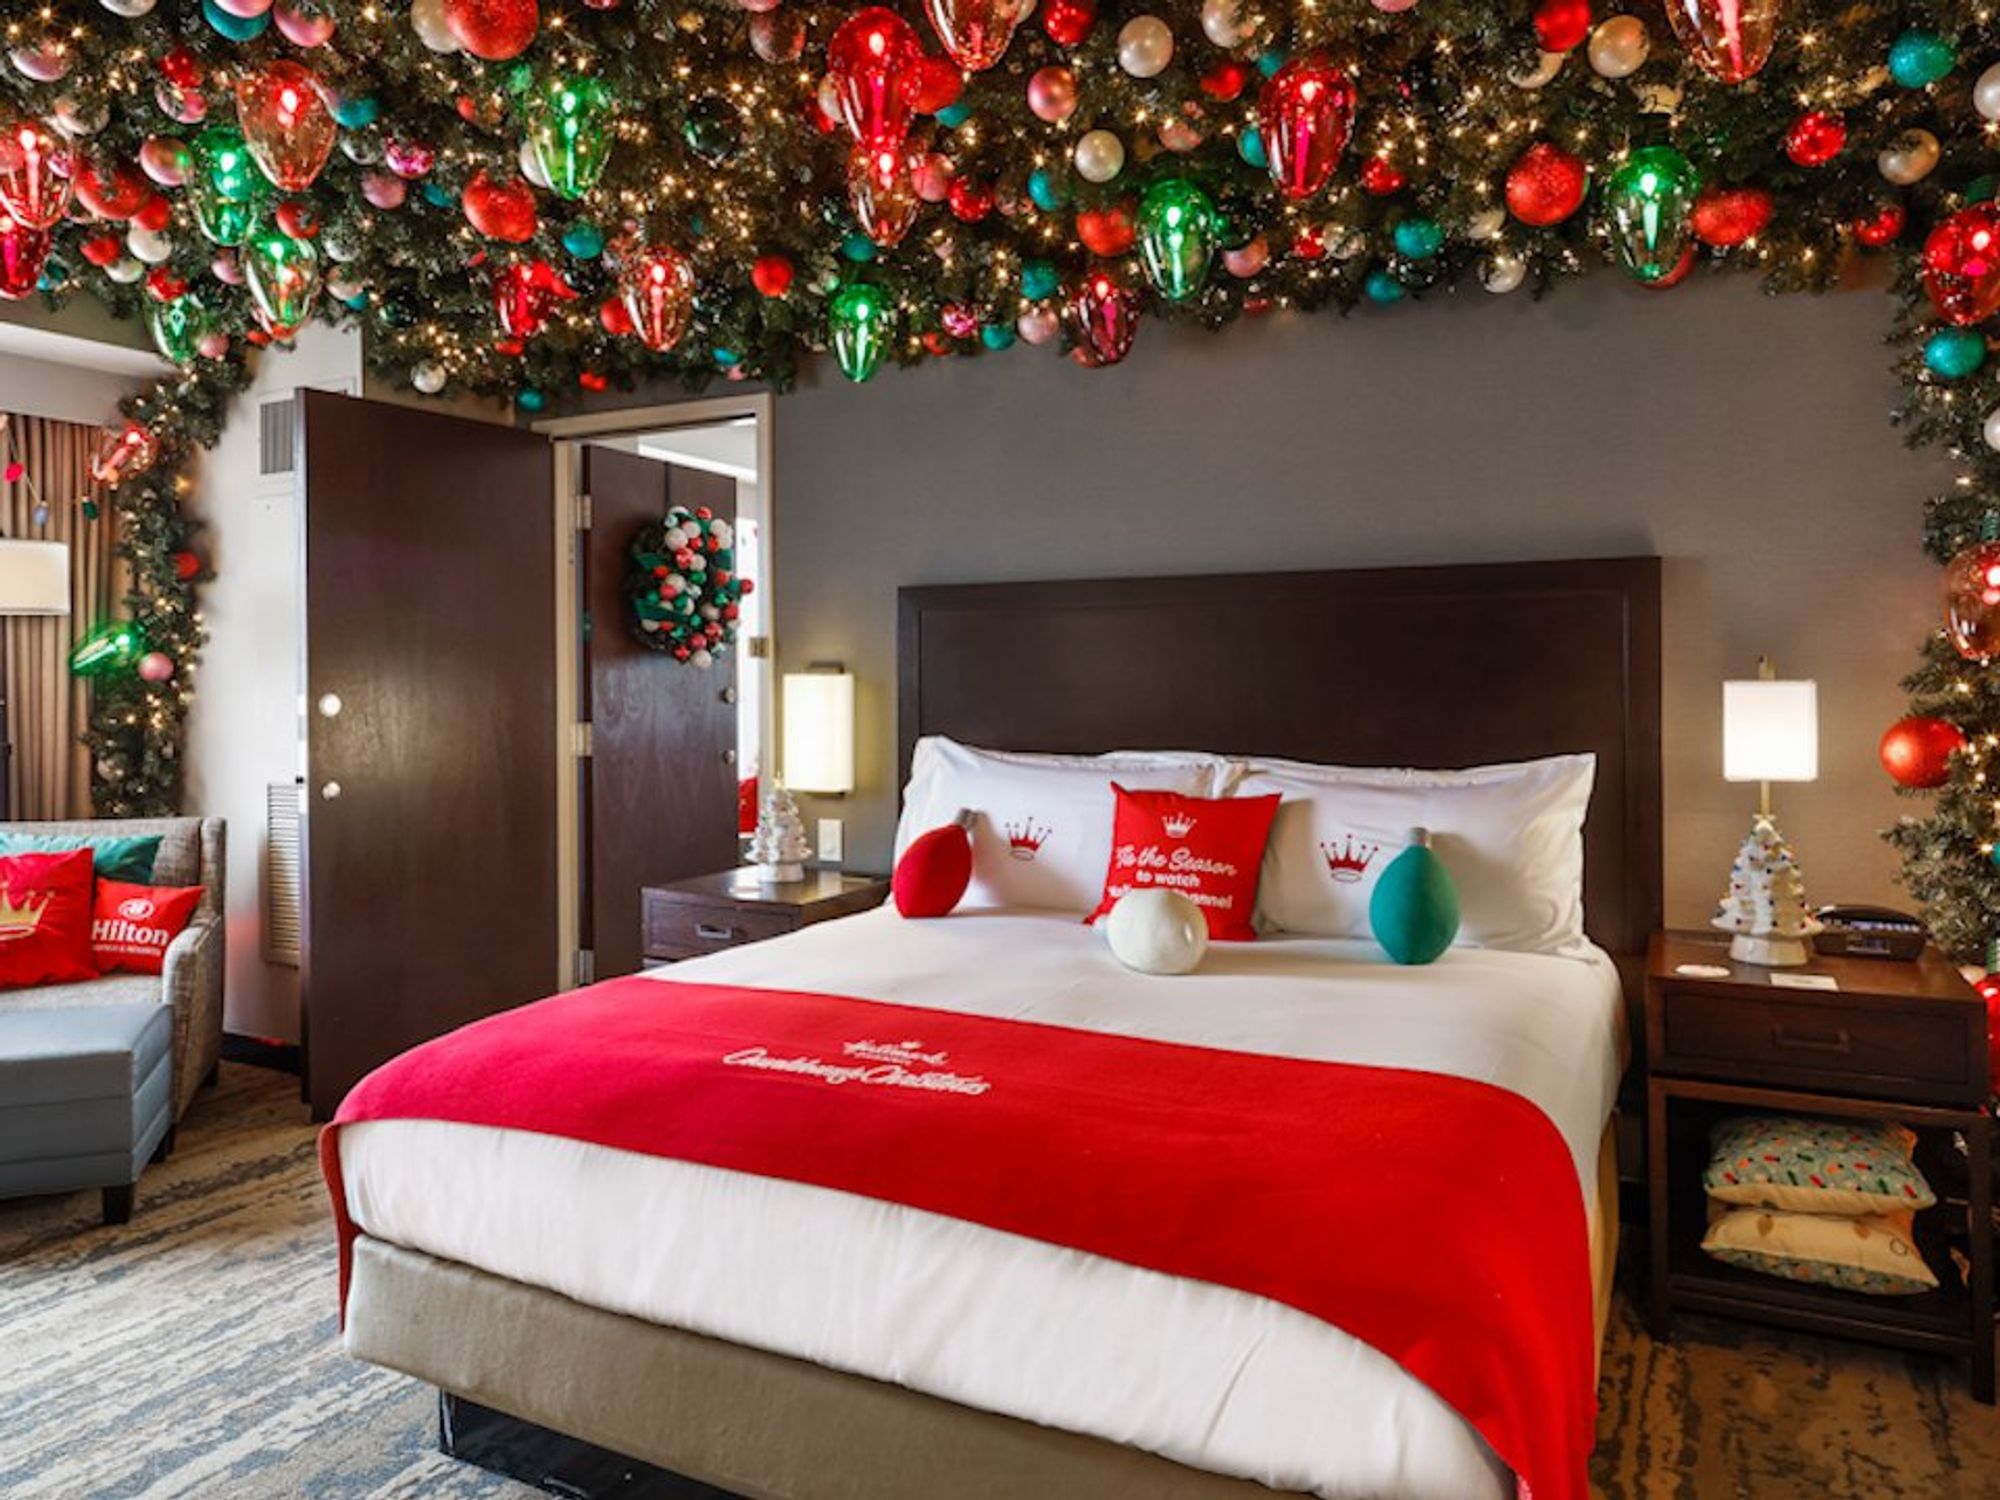 "Haul Out the Holly" suite at the Hilton-Americas Houston.